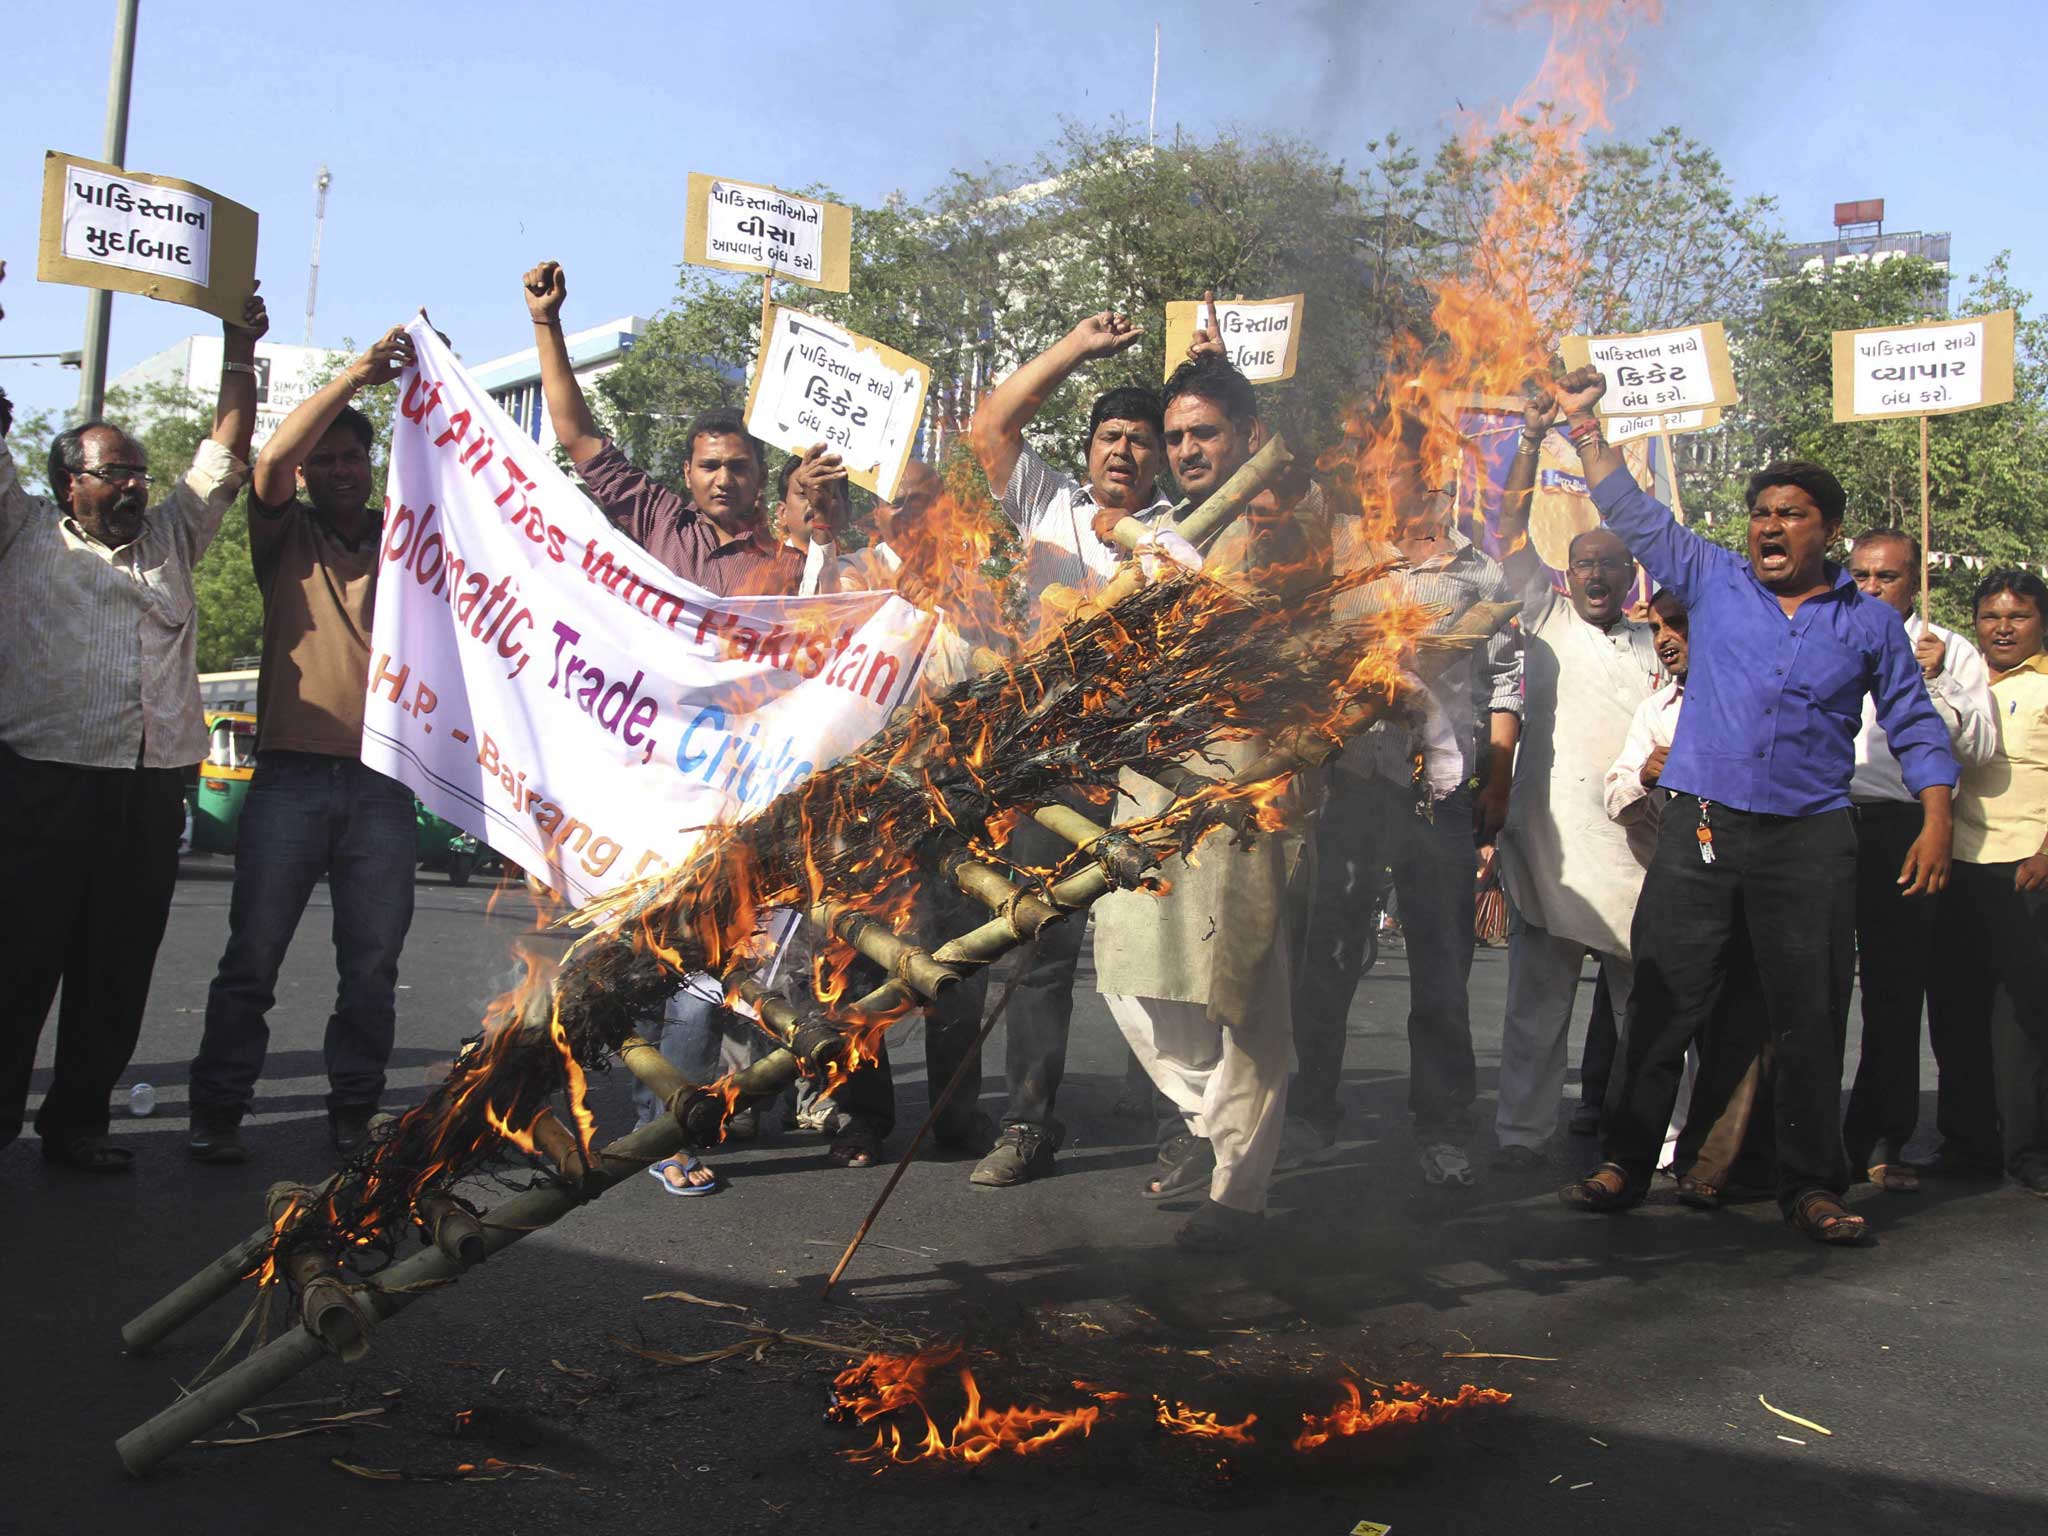 Indian activists of right wing Hindu groups burn an effigy representing Pakistan after Sarabjit Singh, a convicted Indian spy who was on Pakistan's death row, died from a head injury